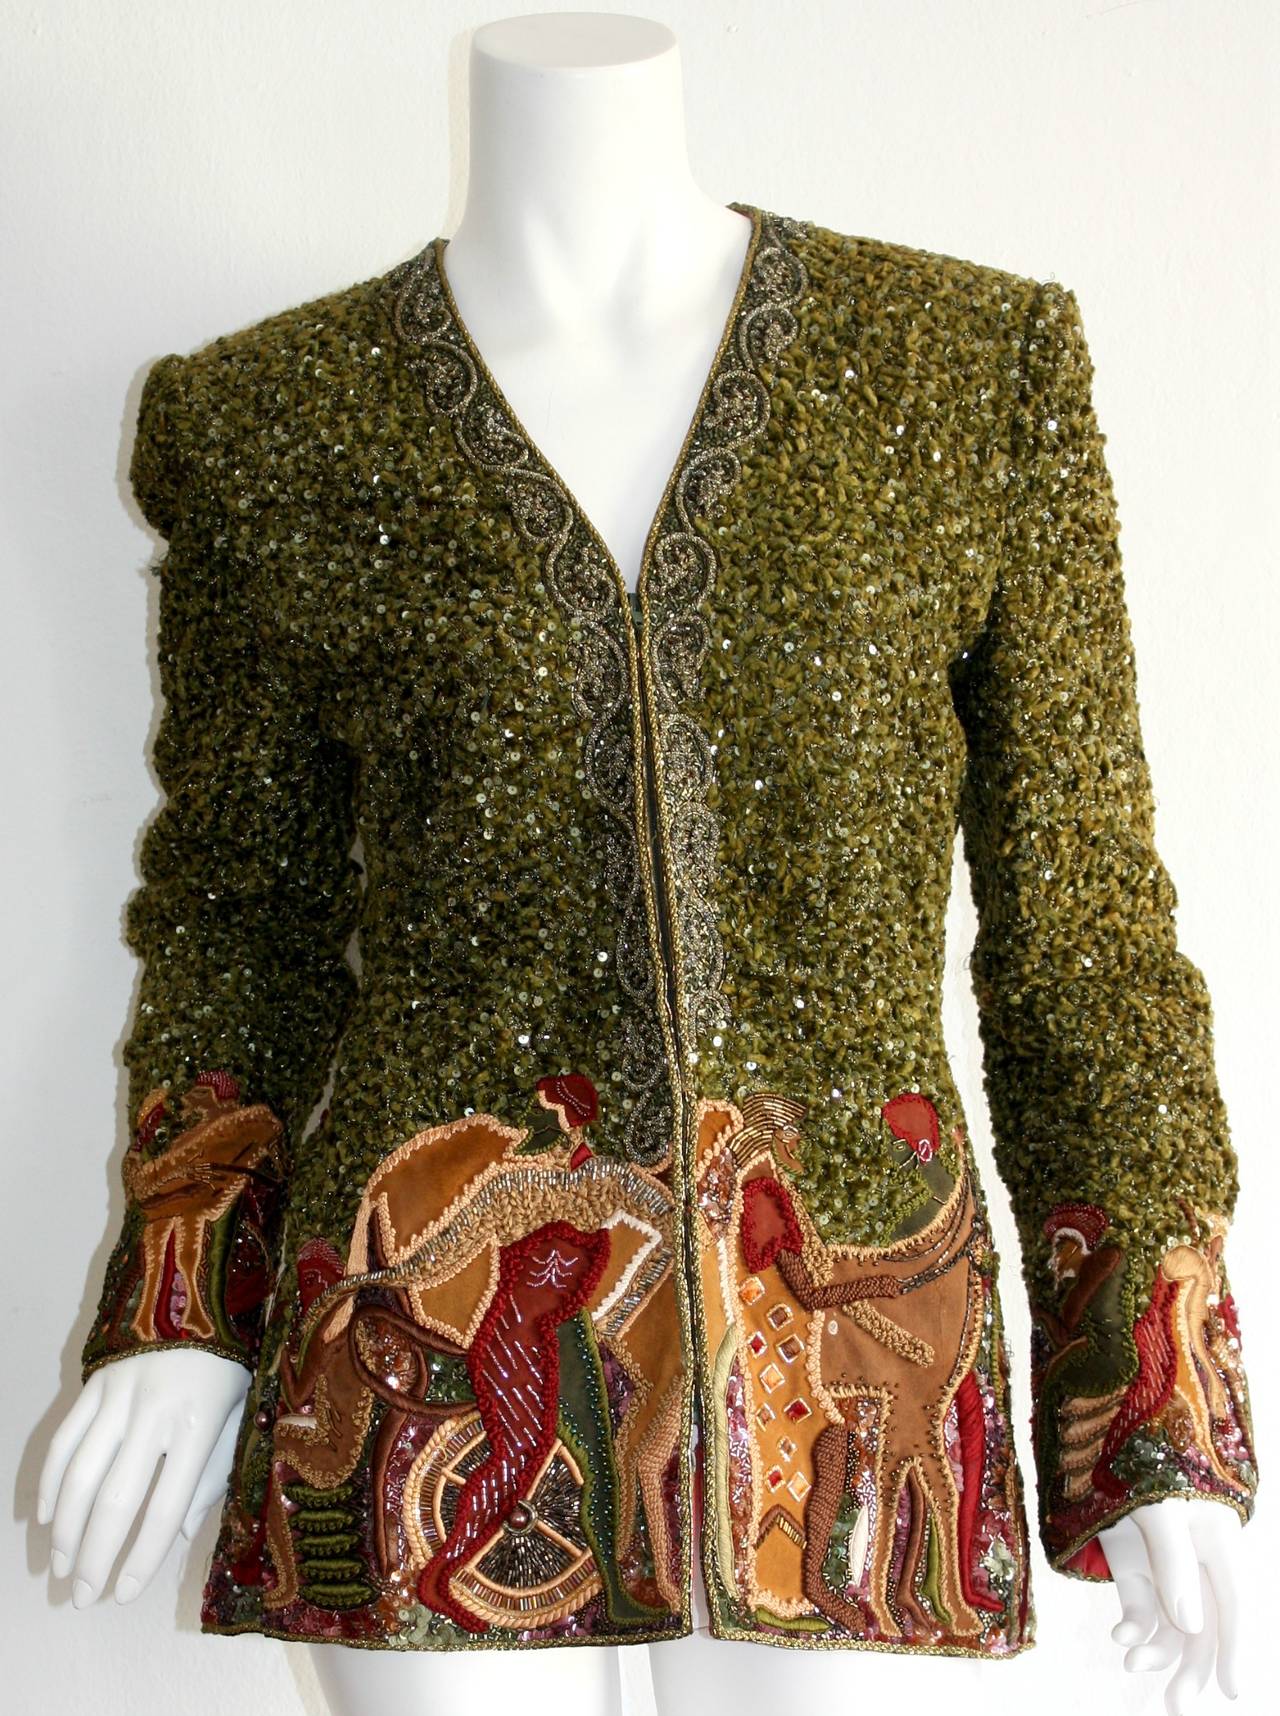 Incredible vintage Mary McFadden fully beaded jacket! Intricate design. Fully lined. Marked Size US 8

Measurements:
38 inch bust
31 inch waist